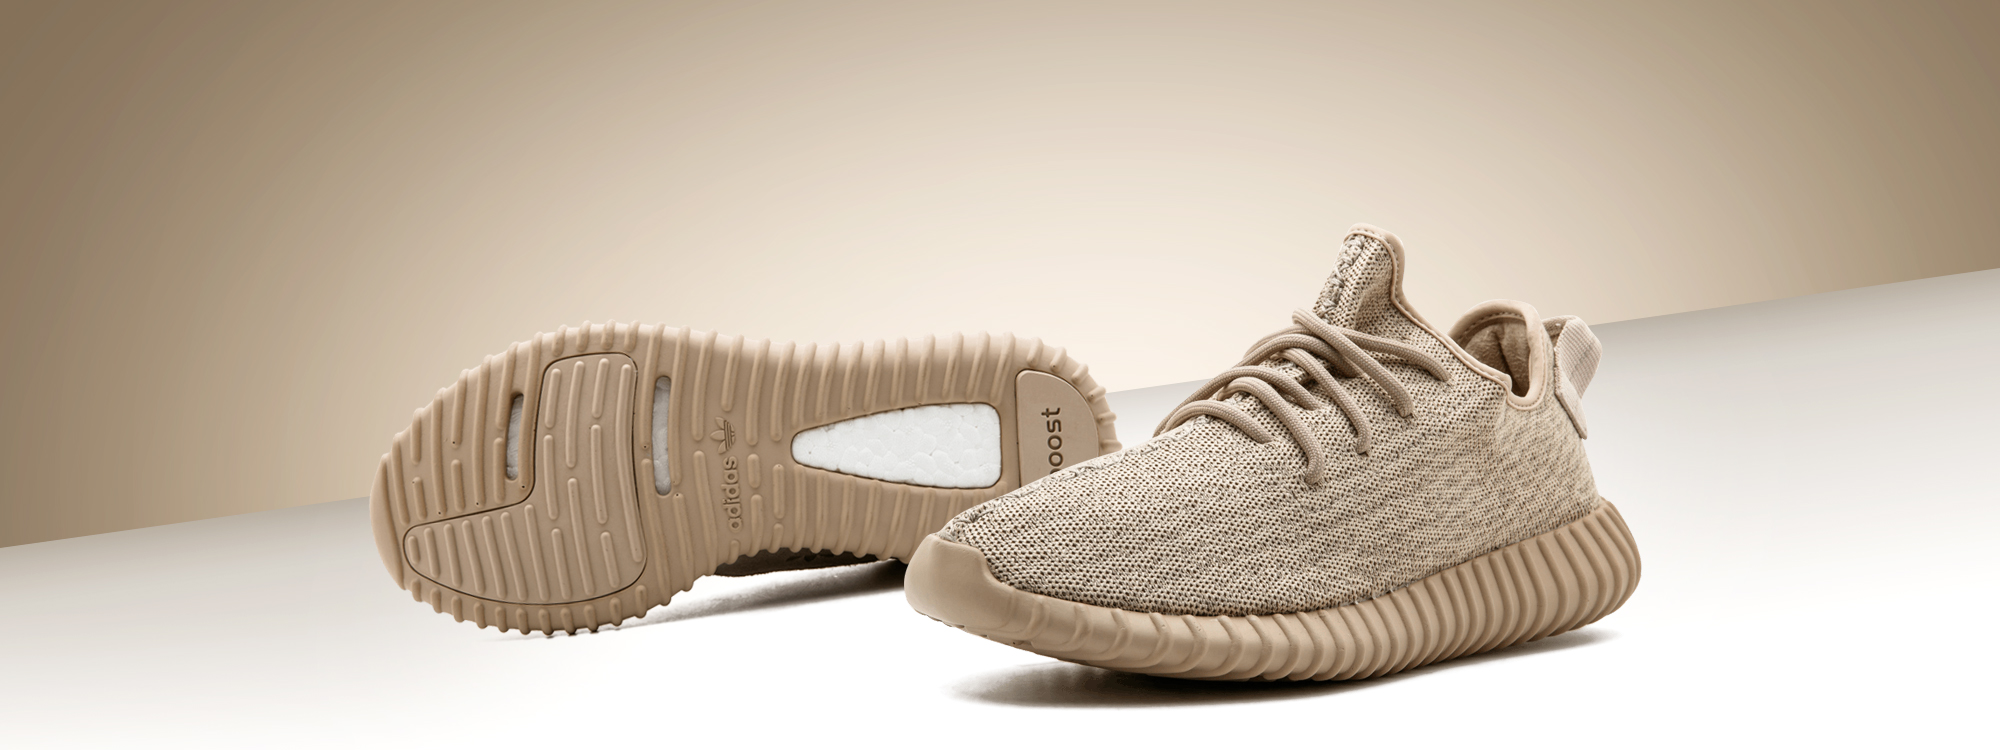  Yeezy Boost  350 Oxford Tan kids outfit